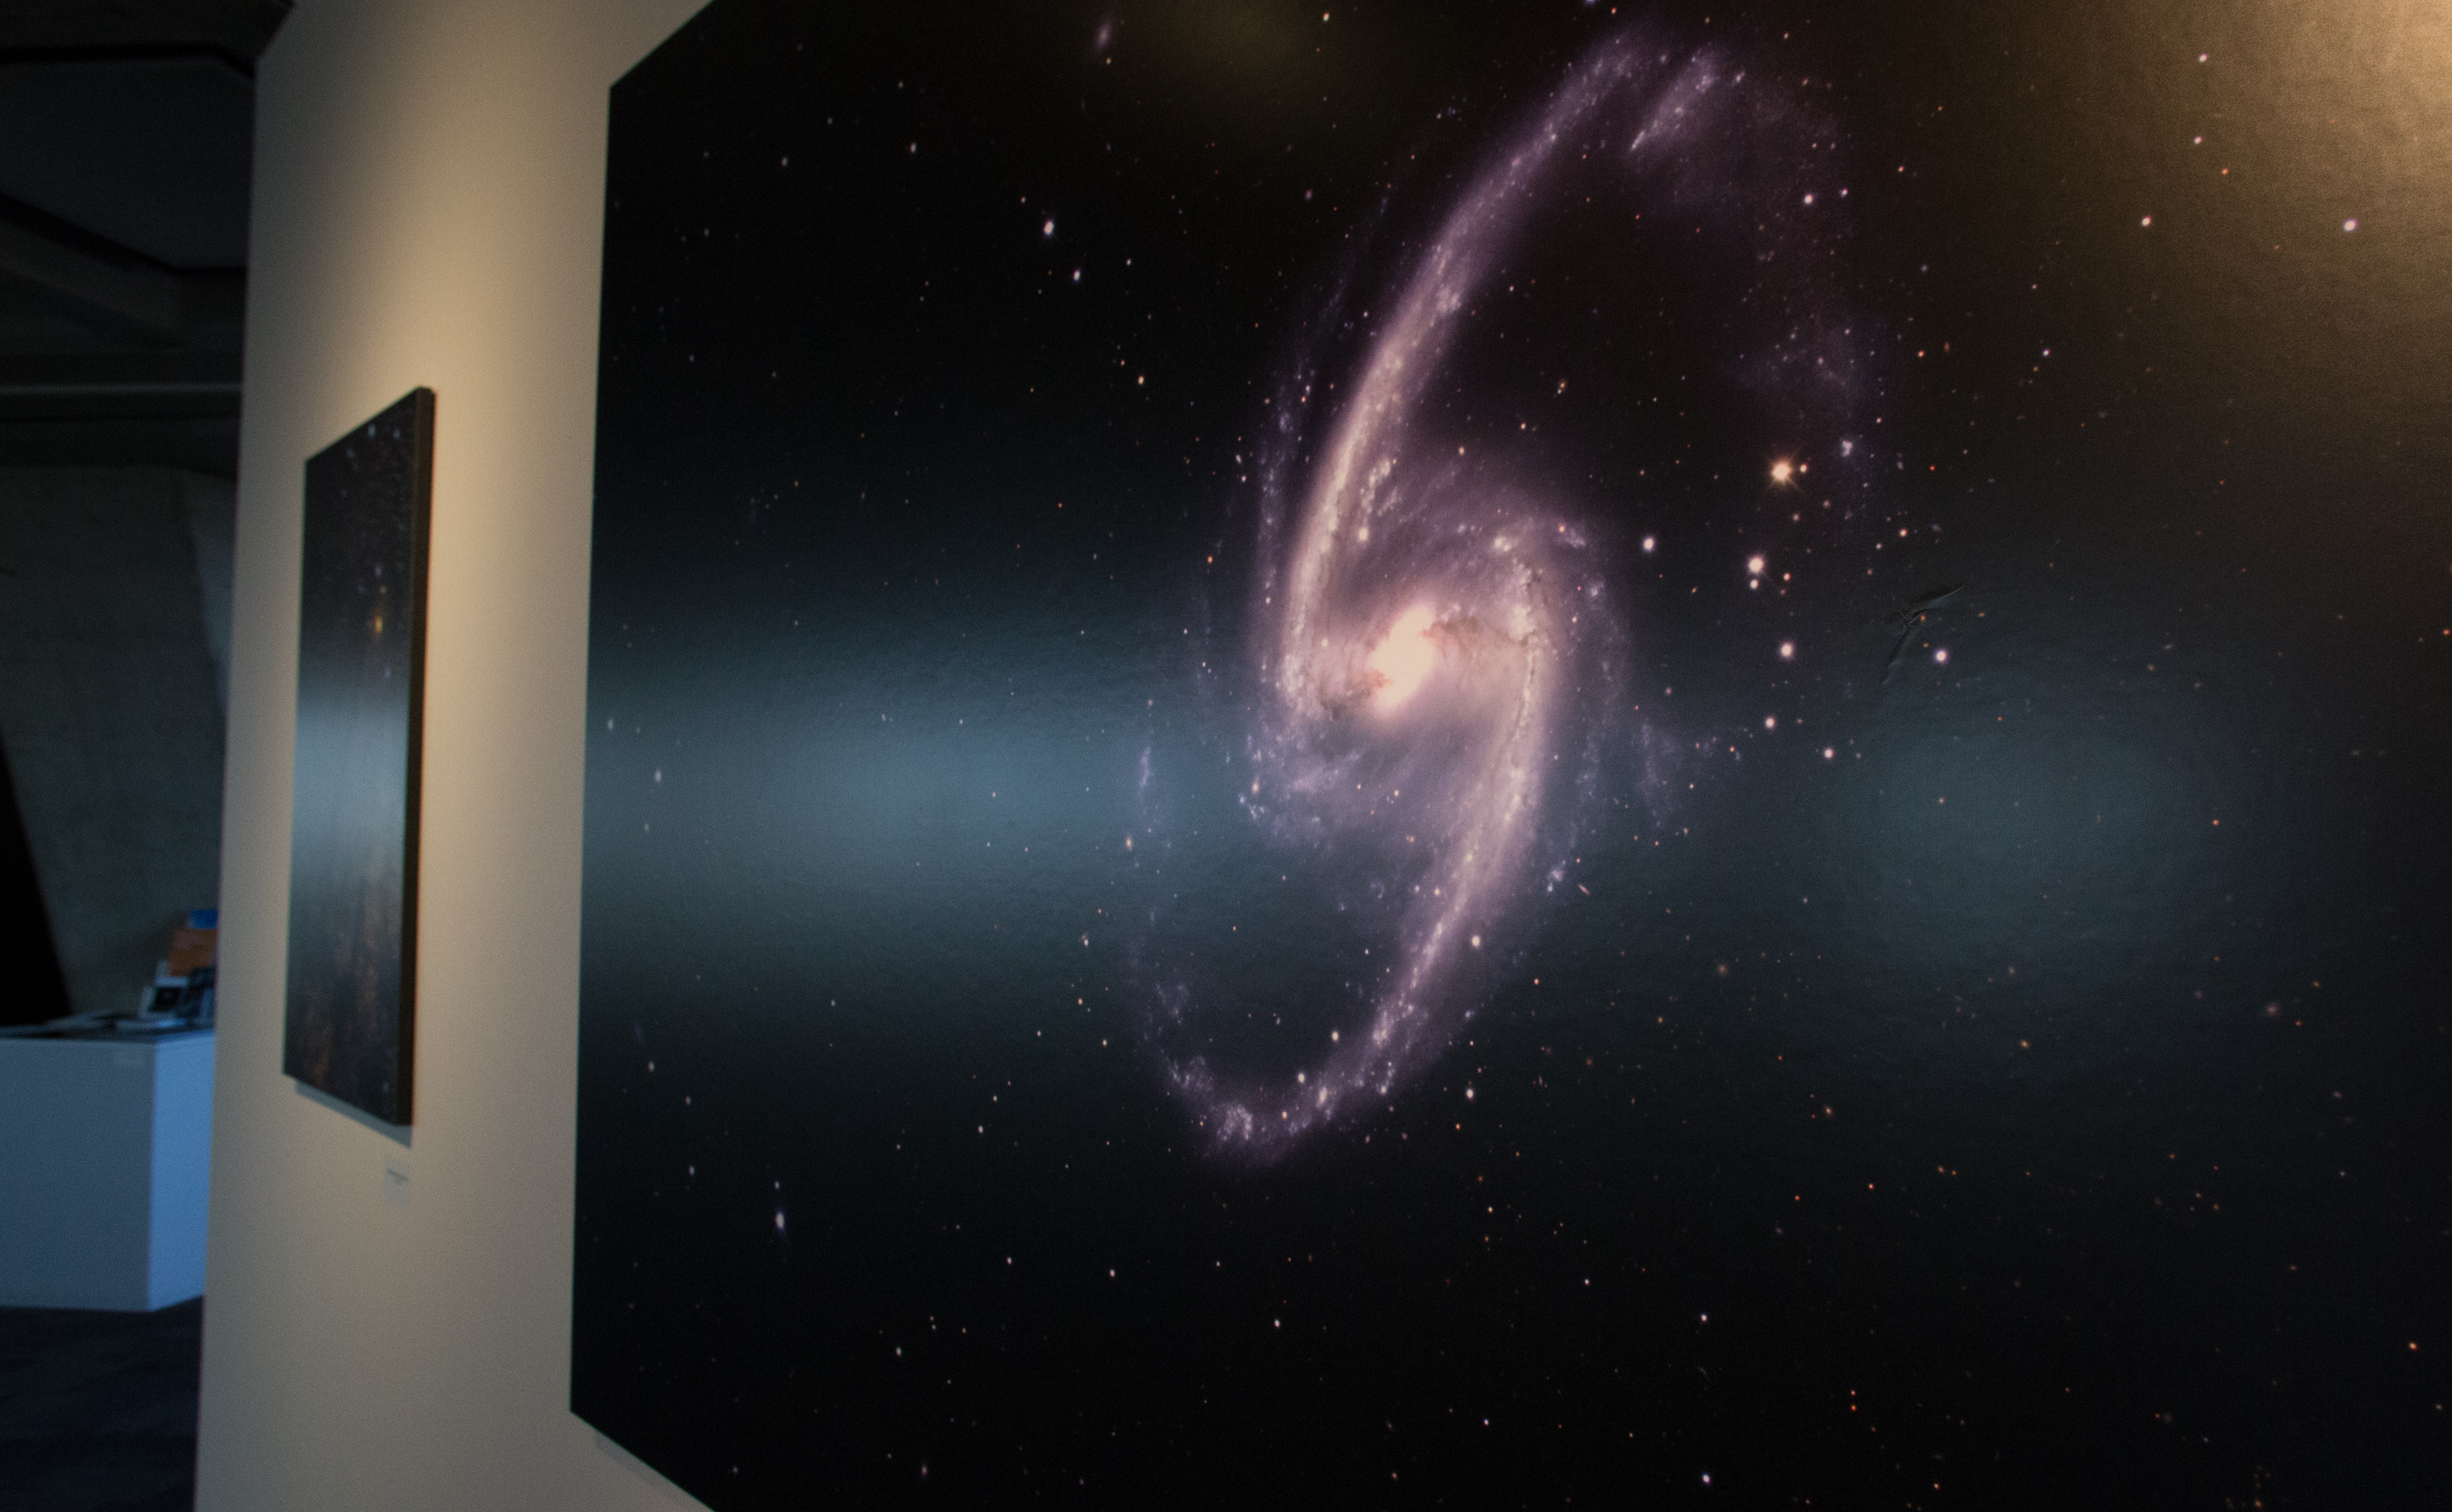 Nikolay Kuropatkin, Marty Murphy, Brian Nord and Brian Yanny created this photo of a galaxy, currently on display as part of the "Art of Darkness" exhibit in the Fermilab Art Gallery. A reception takes place on March 18 from 5-7 p.m. Photo of the photo: Rashmi Shivni